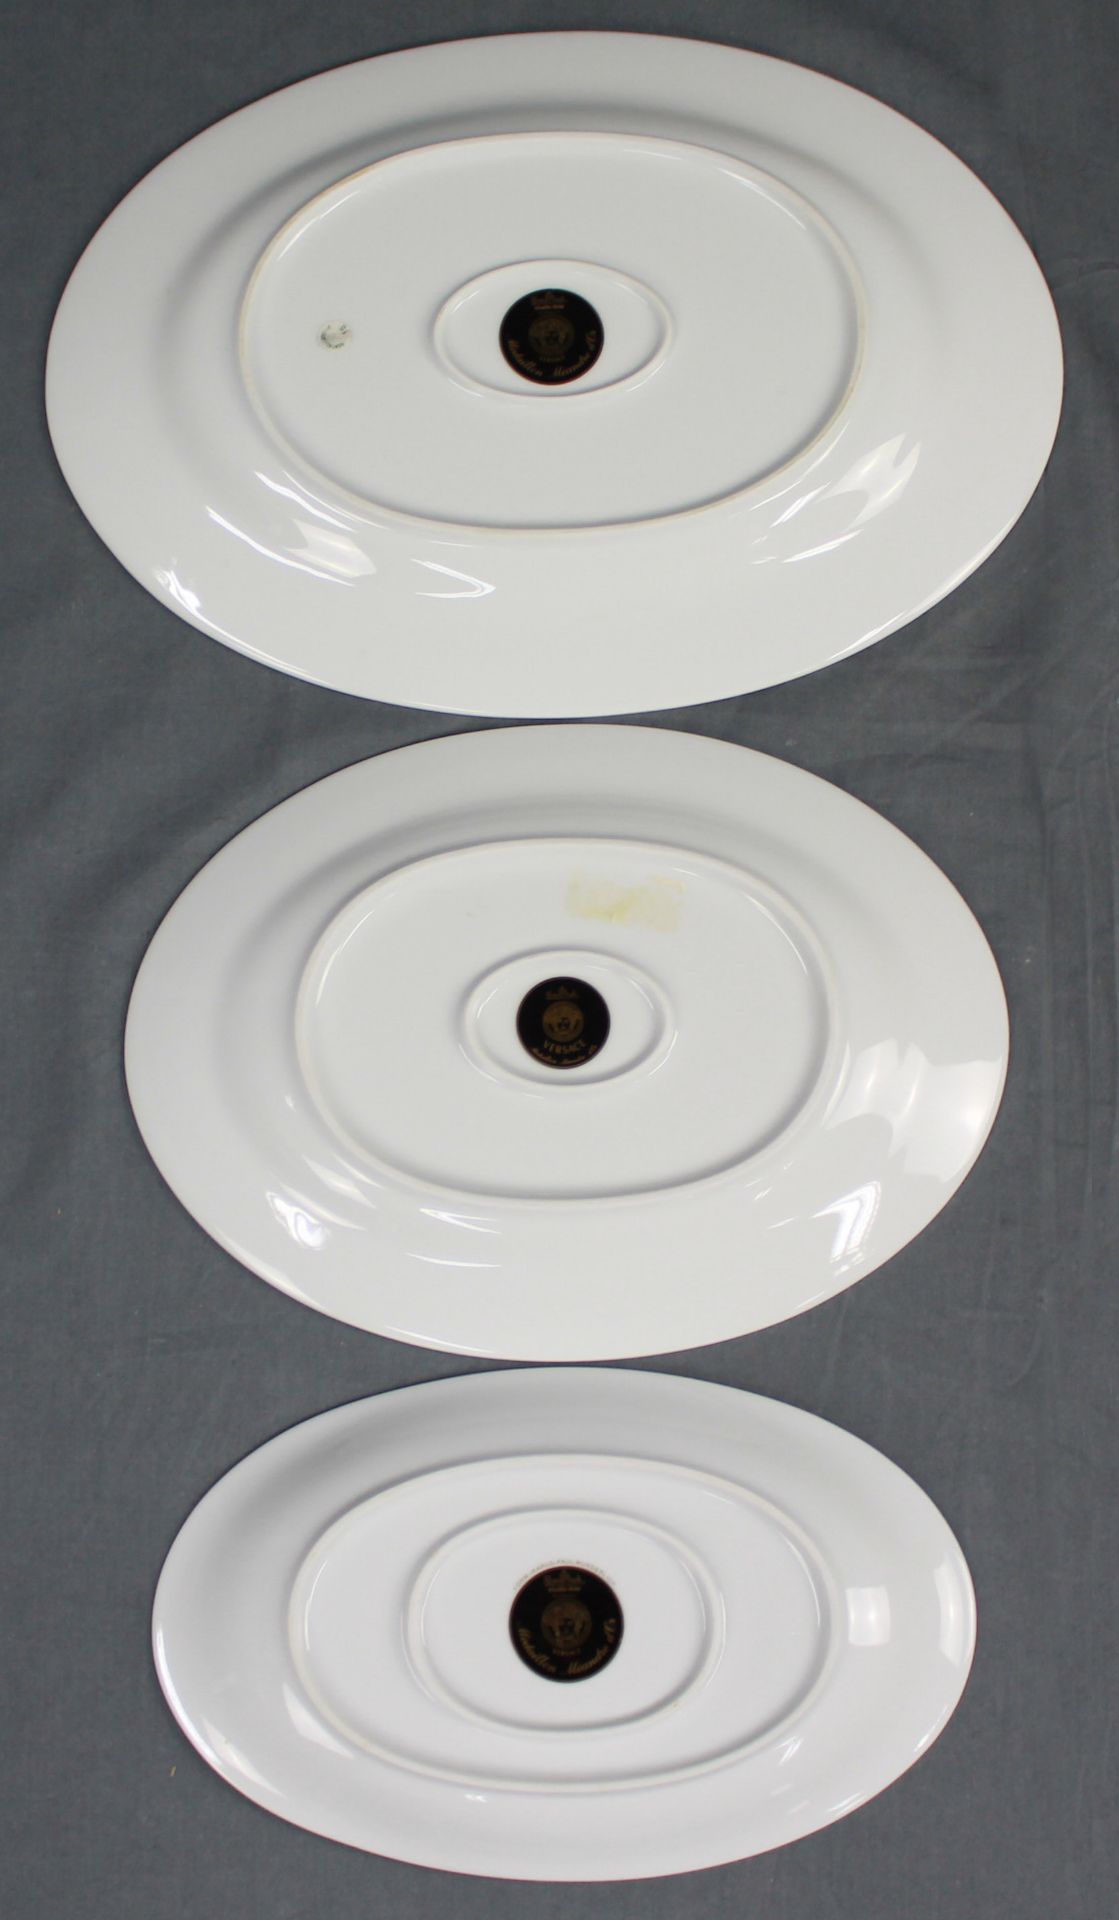 Rosenthal Versace porcelain. Dining service and coffee service for 6 people. - Image 16 of 27